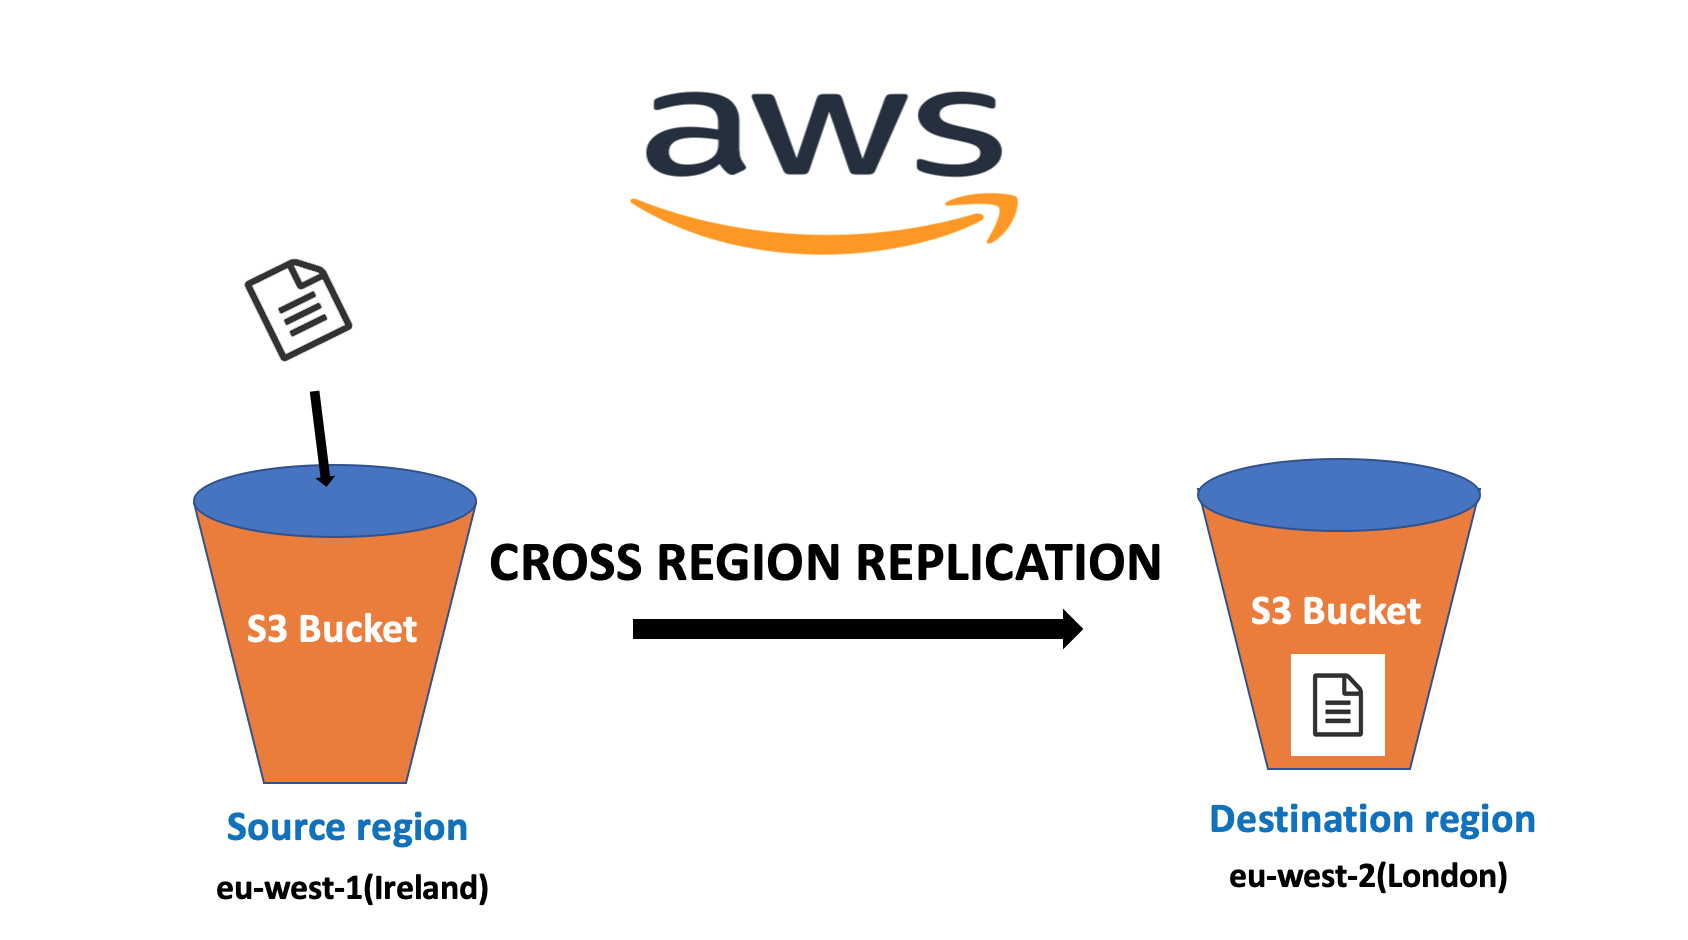 AWS Disaster Recovery Strategies – What Steps You Can Plan Out?